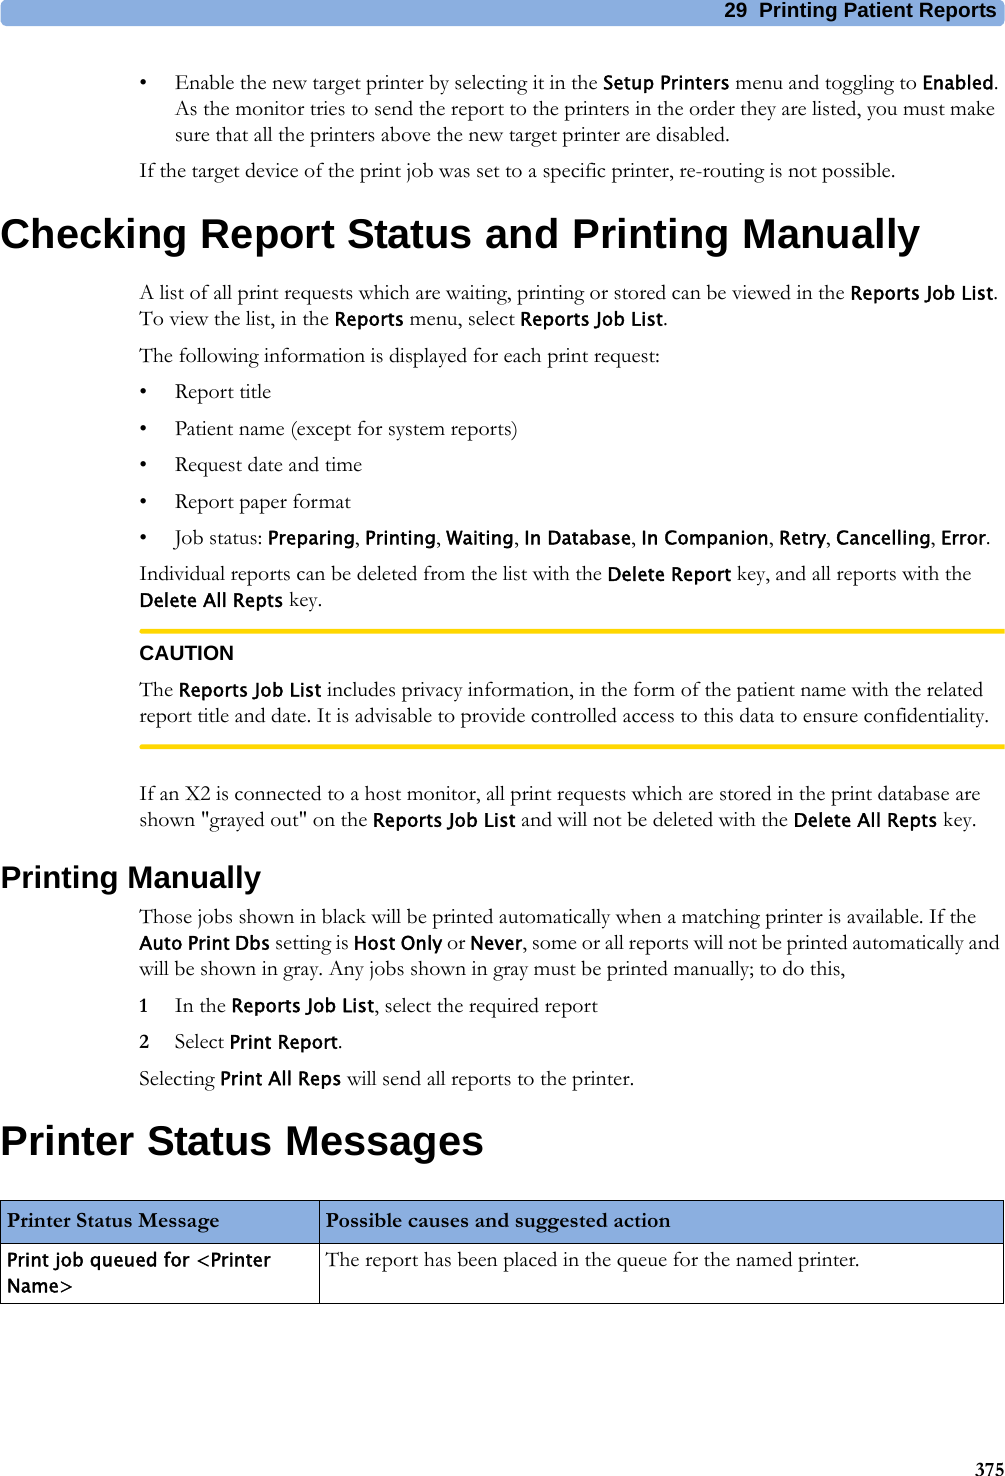 29 Printing Patient Reports375• Enable the new target printer by selecting it in the Setup Printers menu and toggling to Enabled. As the monitor tries to send the report to the printers in the order they are listed, you must make sure that all the printers above the new target printer are disabled.If the target device of the print job was set to a specific printer, re-routing is not possible.Checking Report Status and Printing ManuallyA list of all print requests which are waiting, printing or stored can be viewed in the Reports Job List. To view the list, in the Reports menu, select Reports Job List.The following information is displayed for each print request:• Report title• Patient name (except for system reports)• Request date and time• Report paper format•Job status: Preparing, Printing, Waiting, In Database, In Companion, Retry, Cancelling, Error.Individual reports can be deleted from the list with the Delete Report key, and all reports with the Delete All Repts key.CAUTIONThe Reports Job List includes privacy information, in the form of the patient name with the related report title and date. It is advisable to provide controlled access to this data to ensure confidentiality.If an X2 is connected to a host monitor, all print requests which are stored in the print database are shown &quot;grayed out&quot; on the Reports Job List and will not be deleted with the Delete All Repts key.Printing ManuallyThose jobs shown in black will be printed automatically when a matching printer is available. If the Auto Print Dbs setting is Host Only or Never, some or all reports will not be printed automatically and will be shown in gray. Any jobs shown in gray must be printed manually; to do this,1In the Reports Job List, select the required report2Select Print Report.Selecting Print All Reps will send all reports to the printer.Printer Status MessagesPrinter Status Message Possible causes and suggested actionPrint job queued for &lt;Printer Name&gt;The report has been placed in the queue for the named printer.